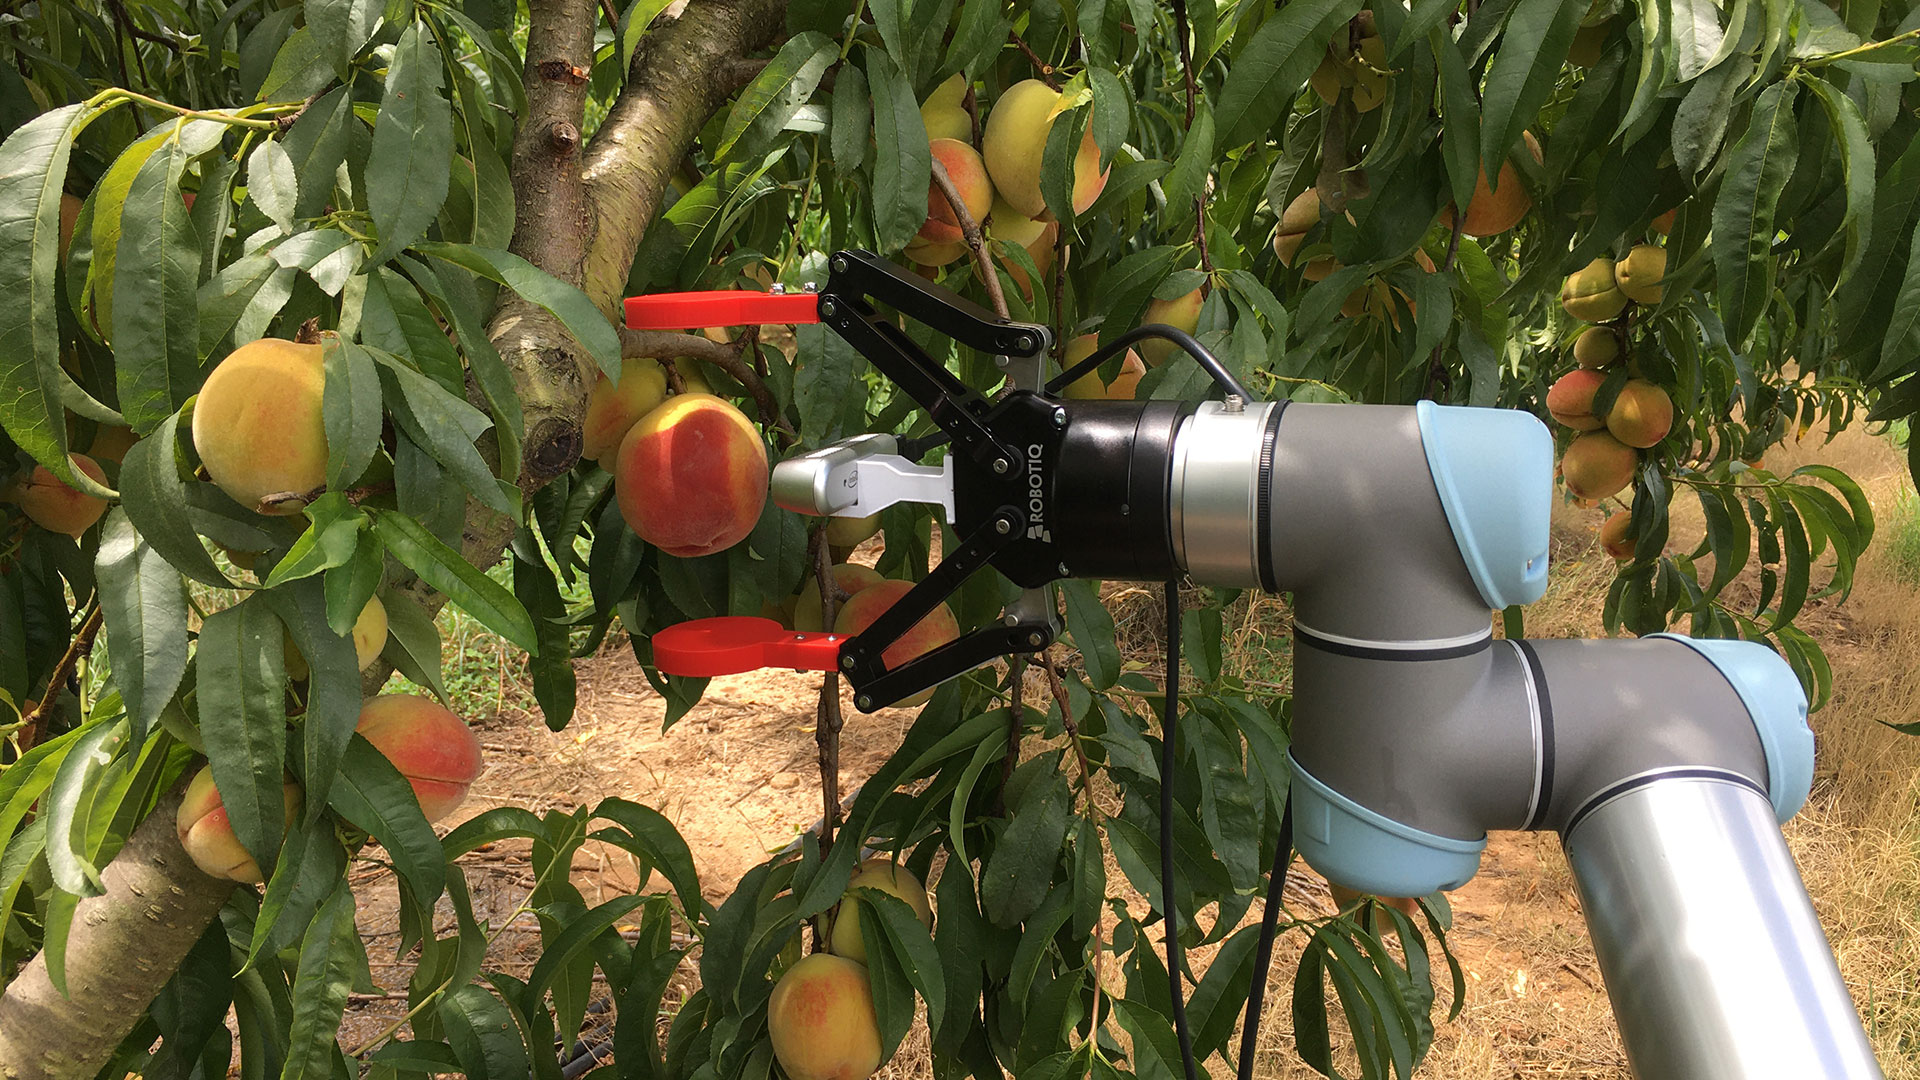 Side view of peach robot raising articulated arm to select peach on tree.